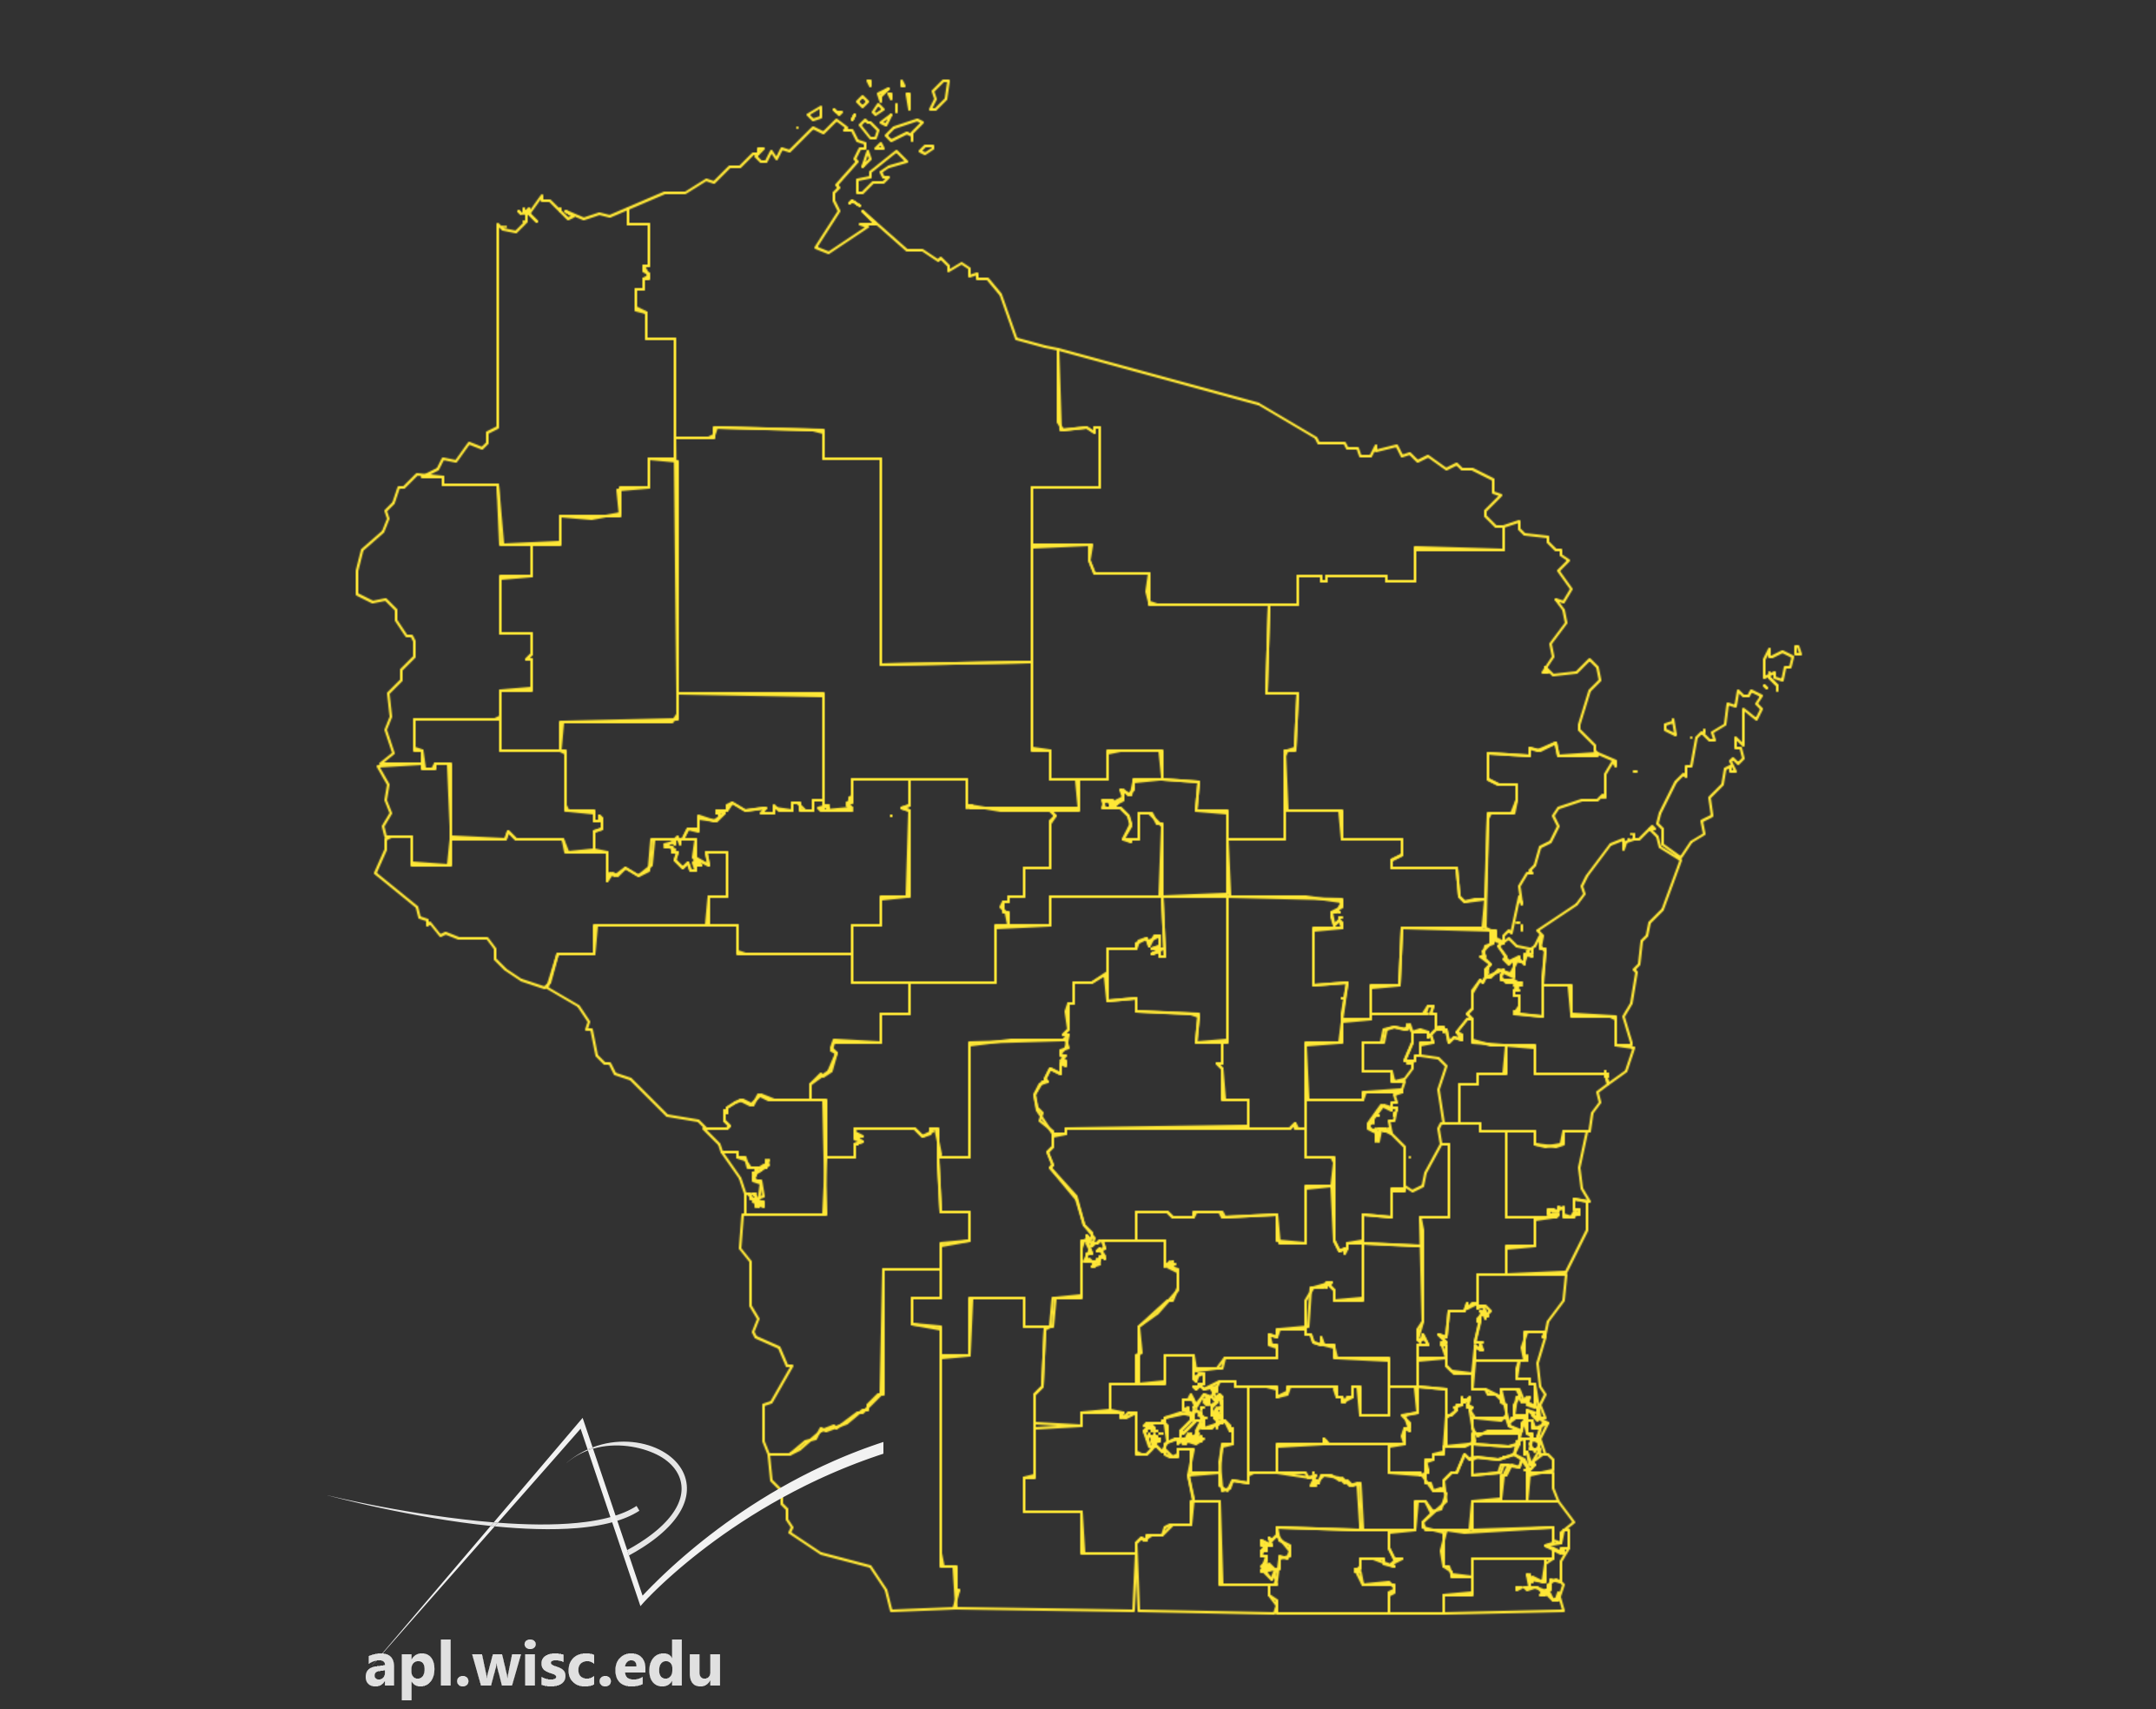 Map of Wisconsin Assembly districts that were revised in 2011.